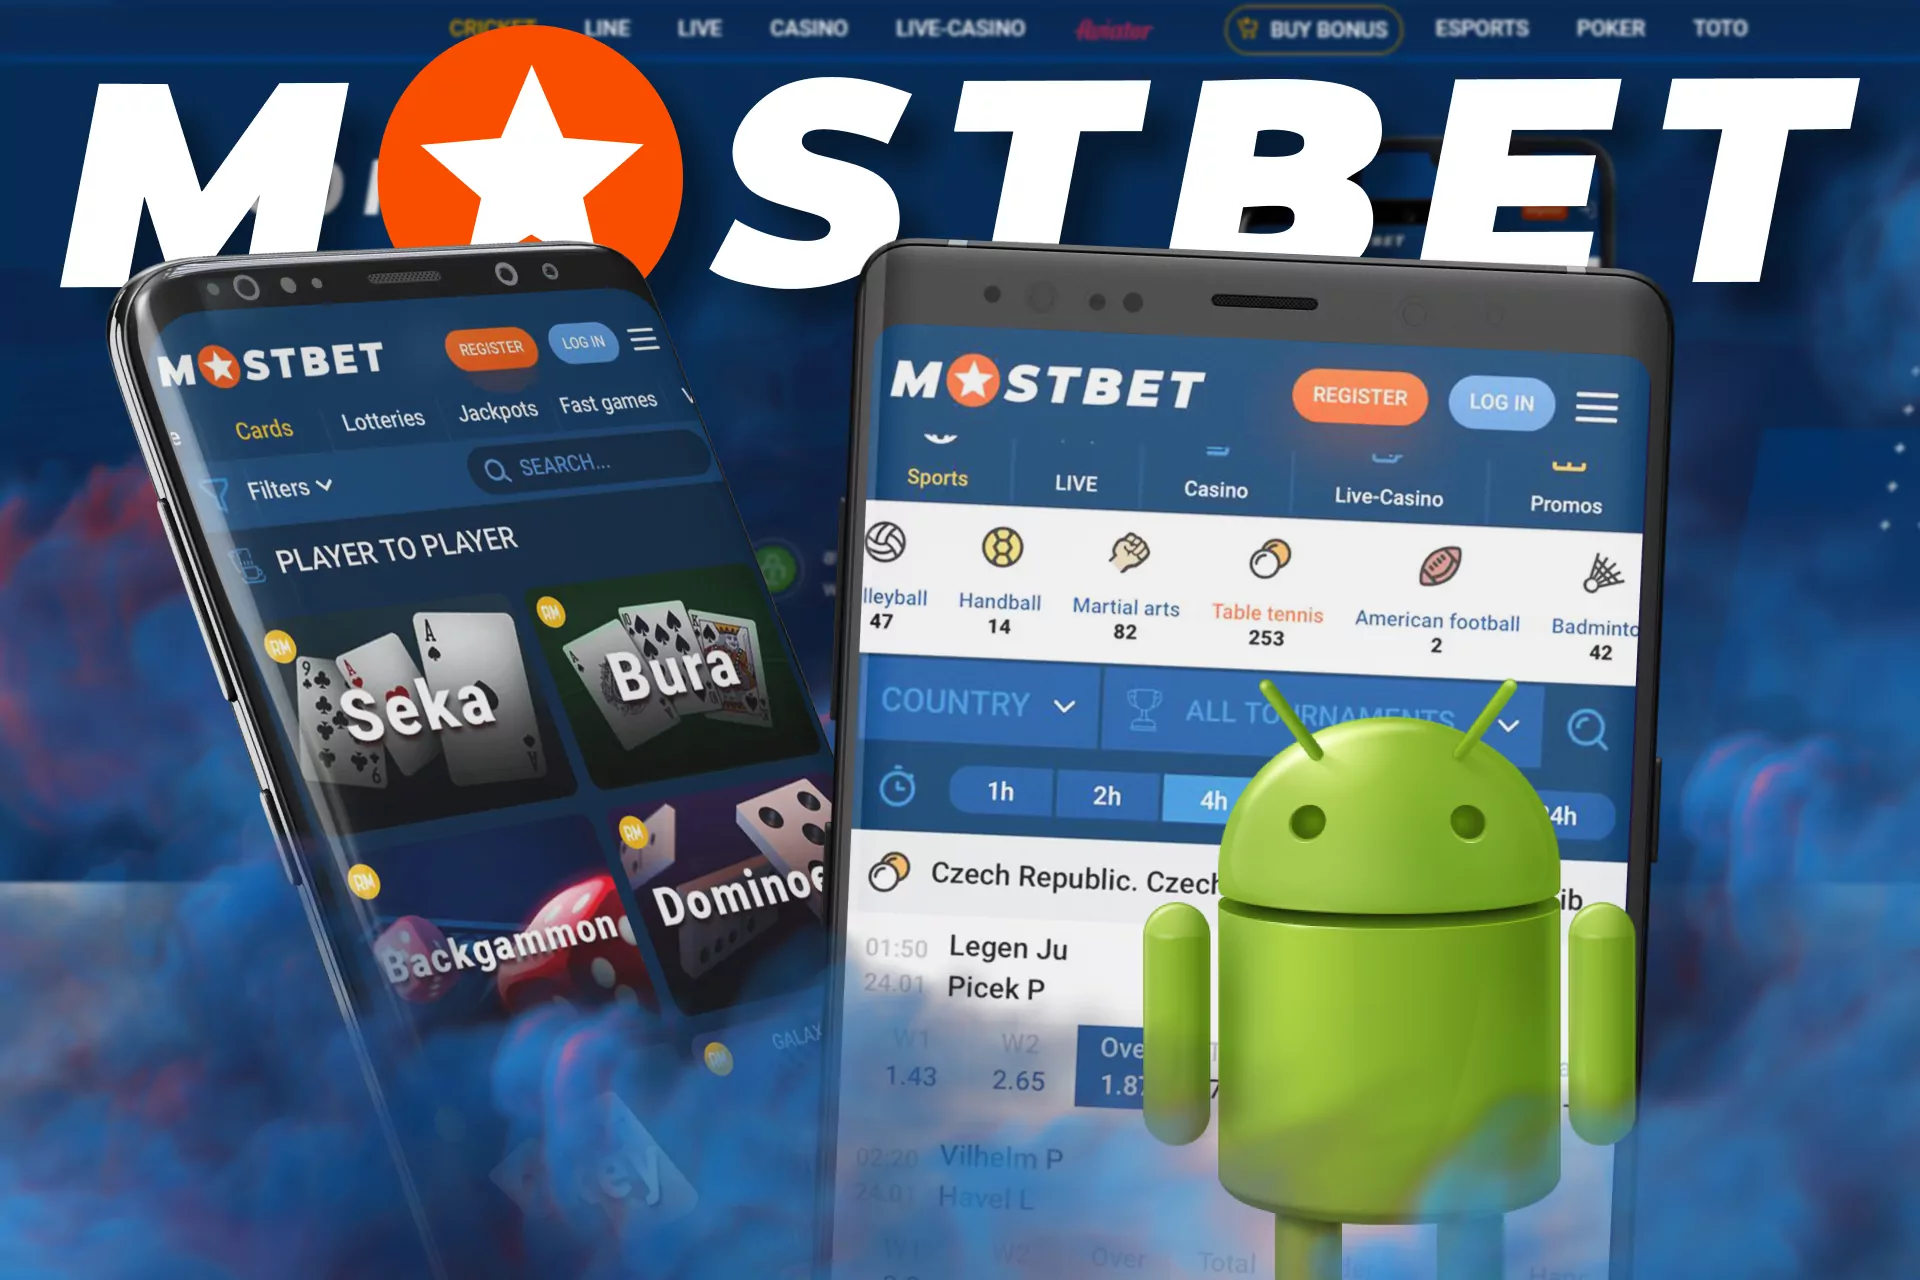 At Mostbet, bet and play casino on your Android device.